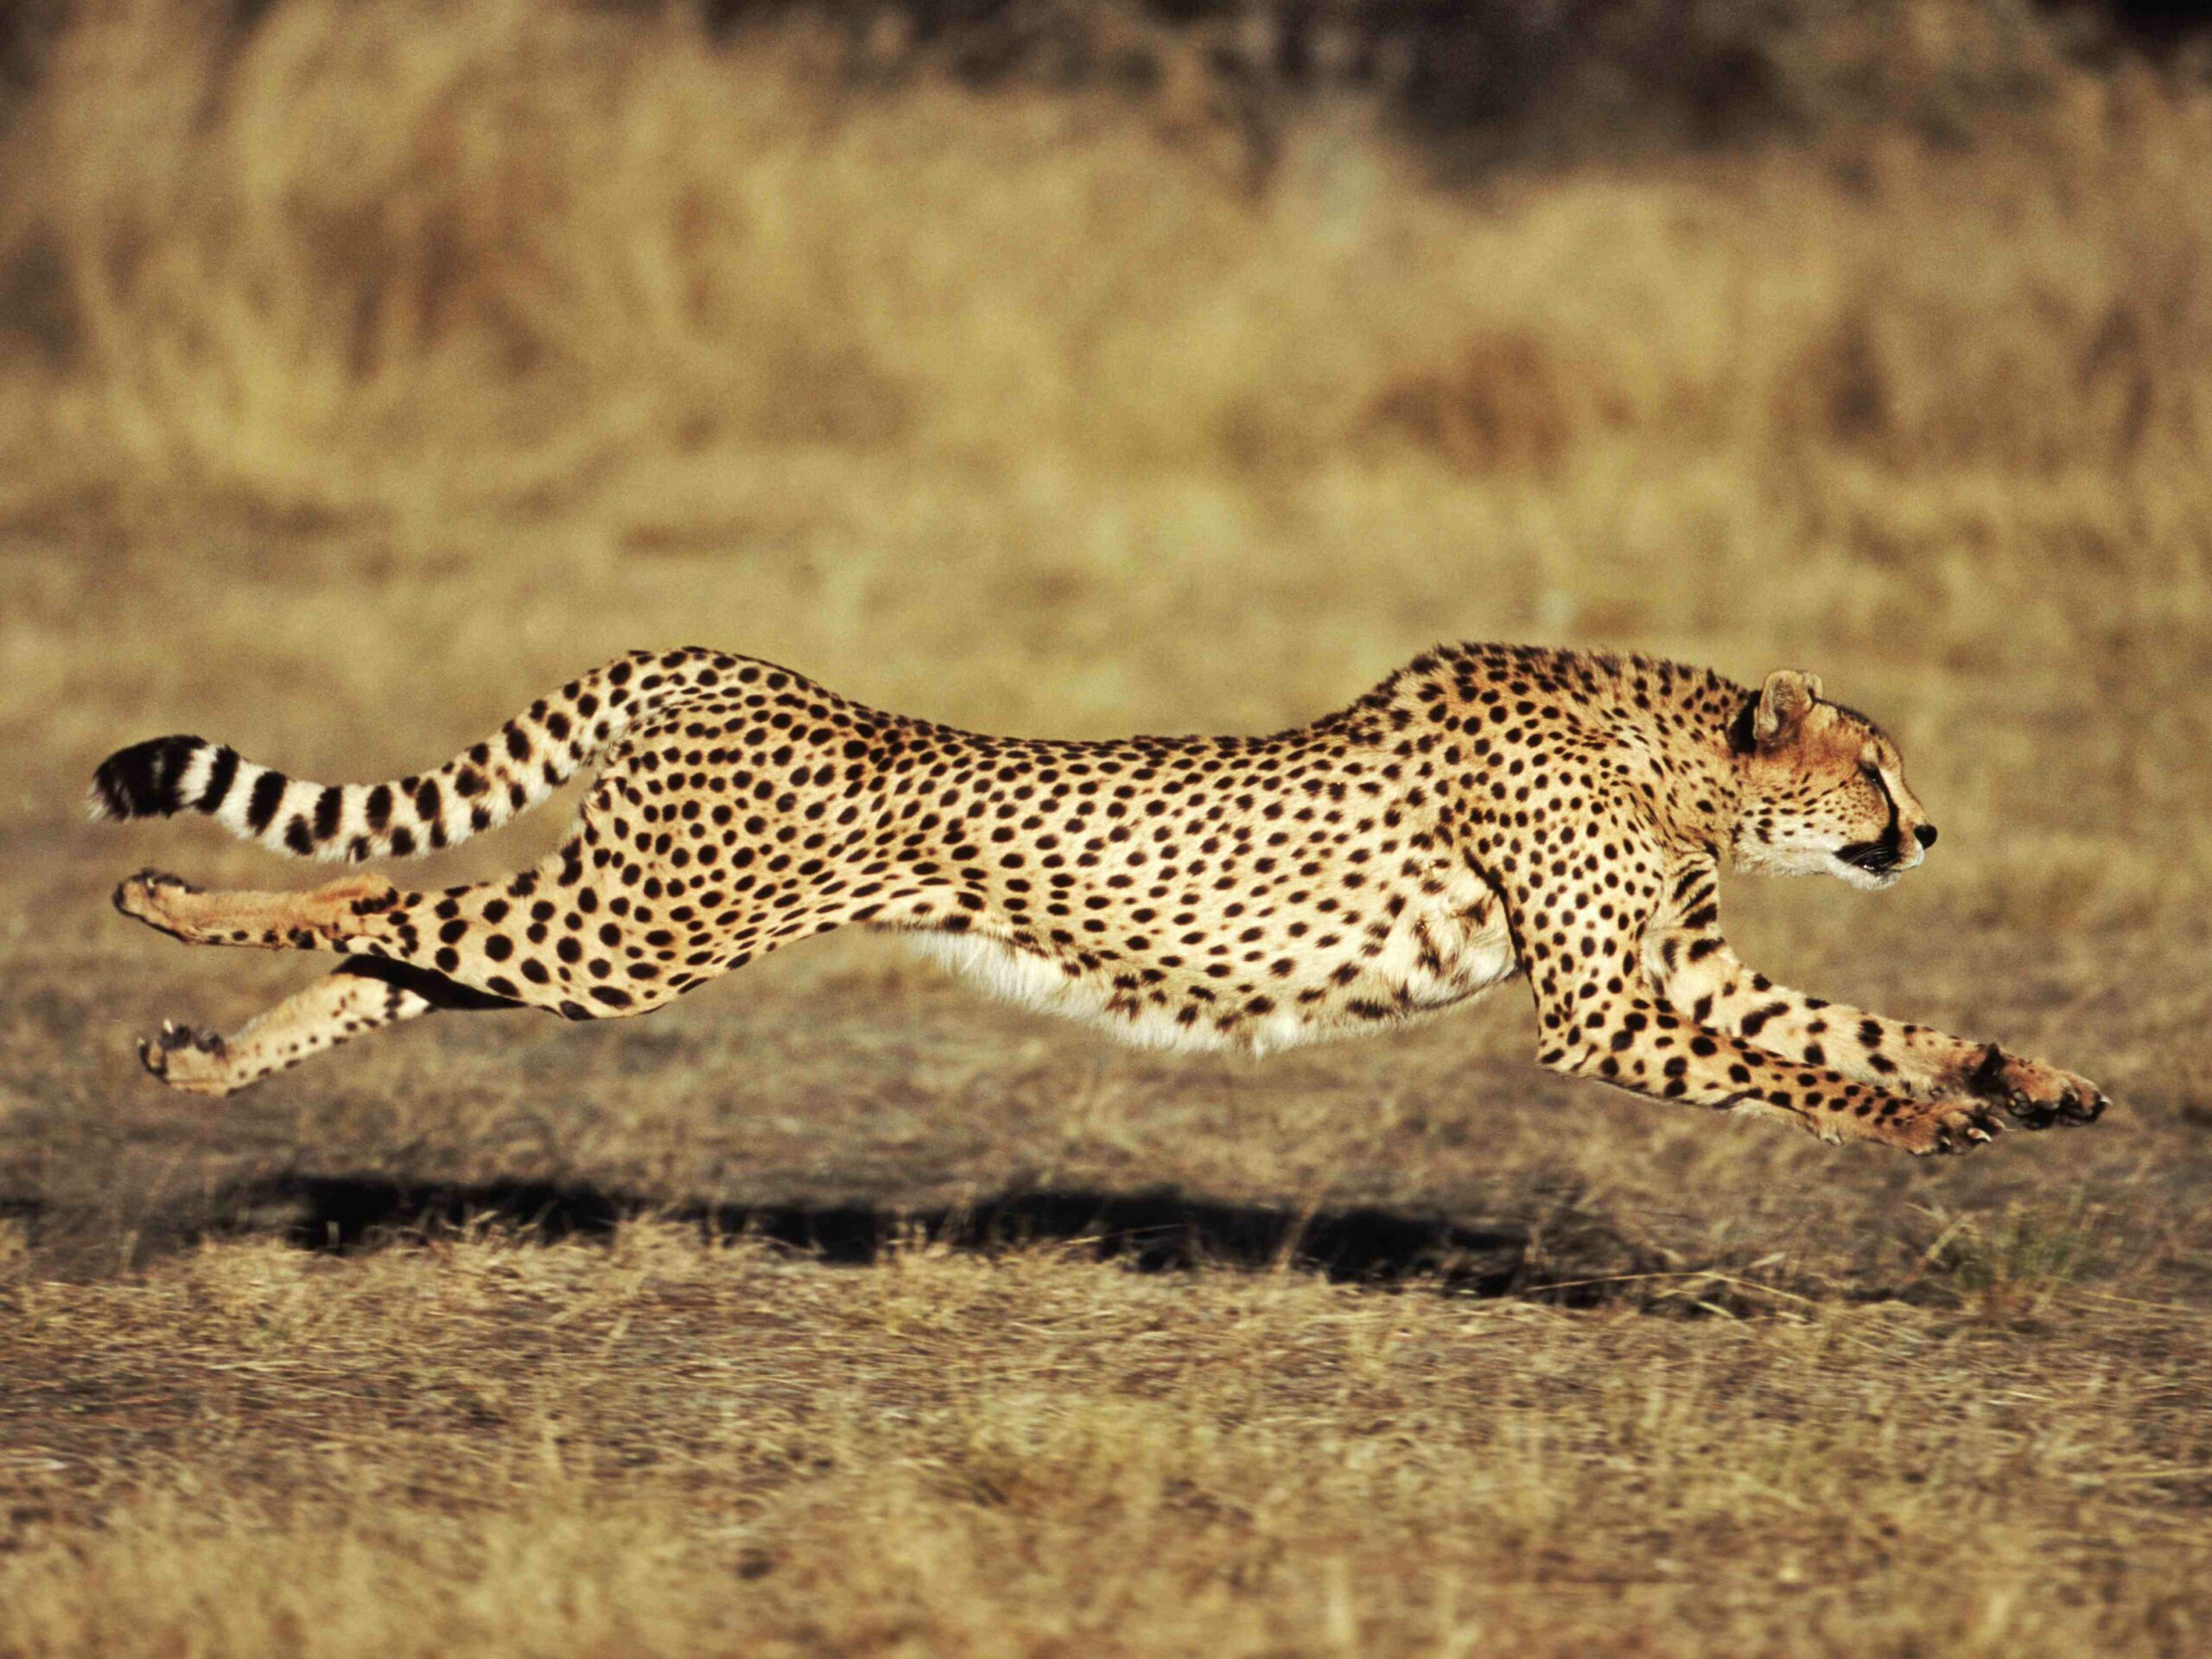 How fast is a cheetah?